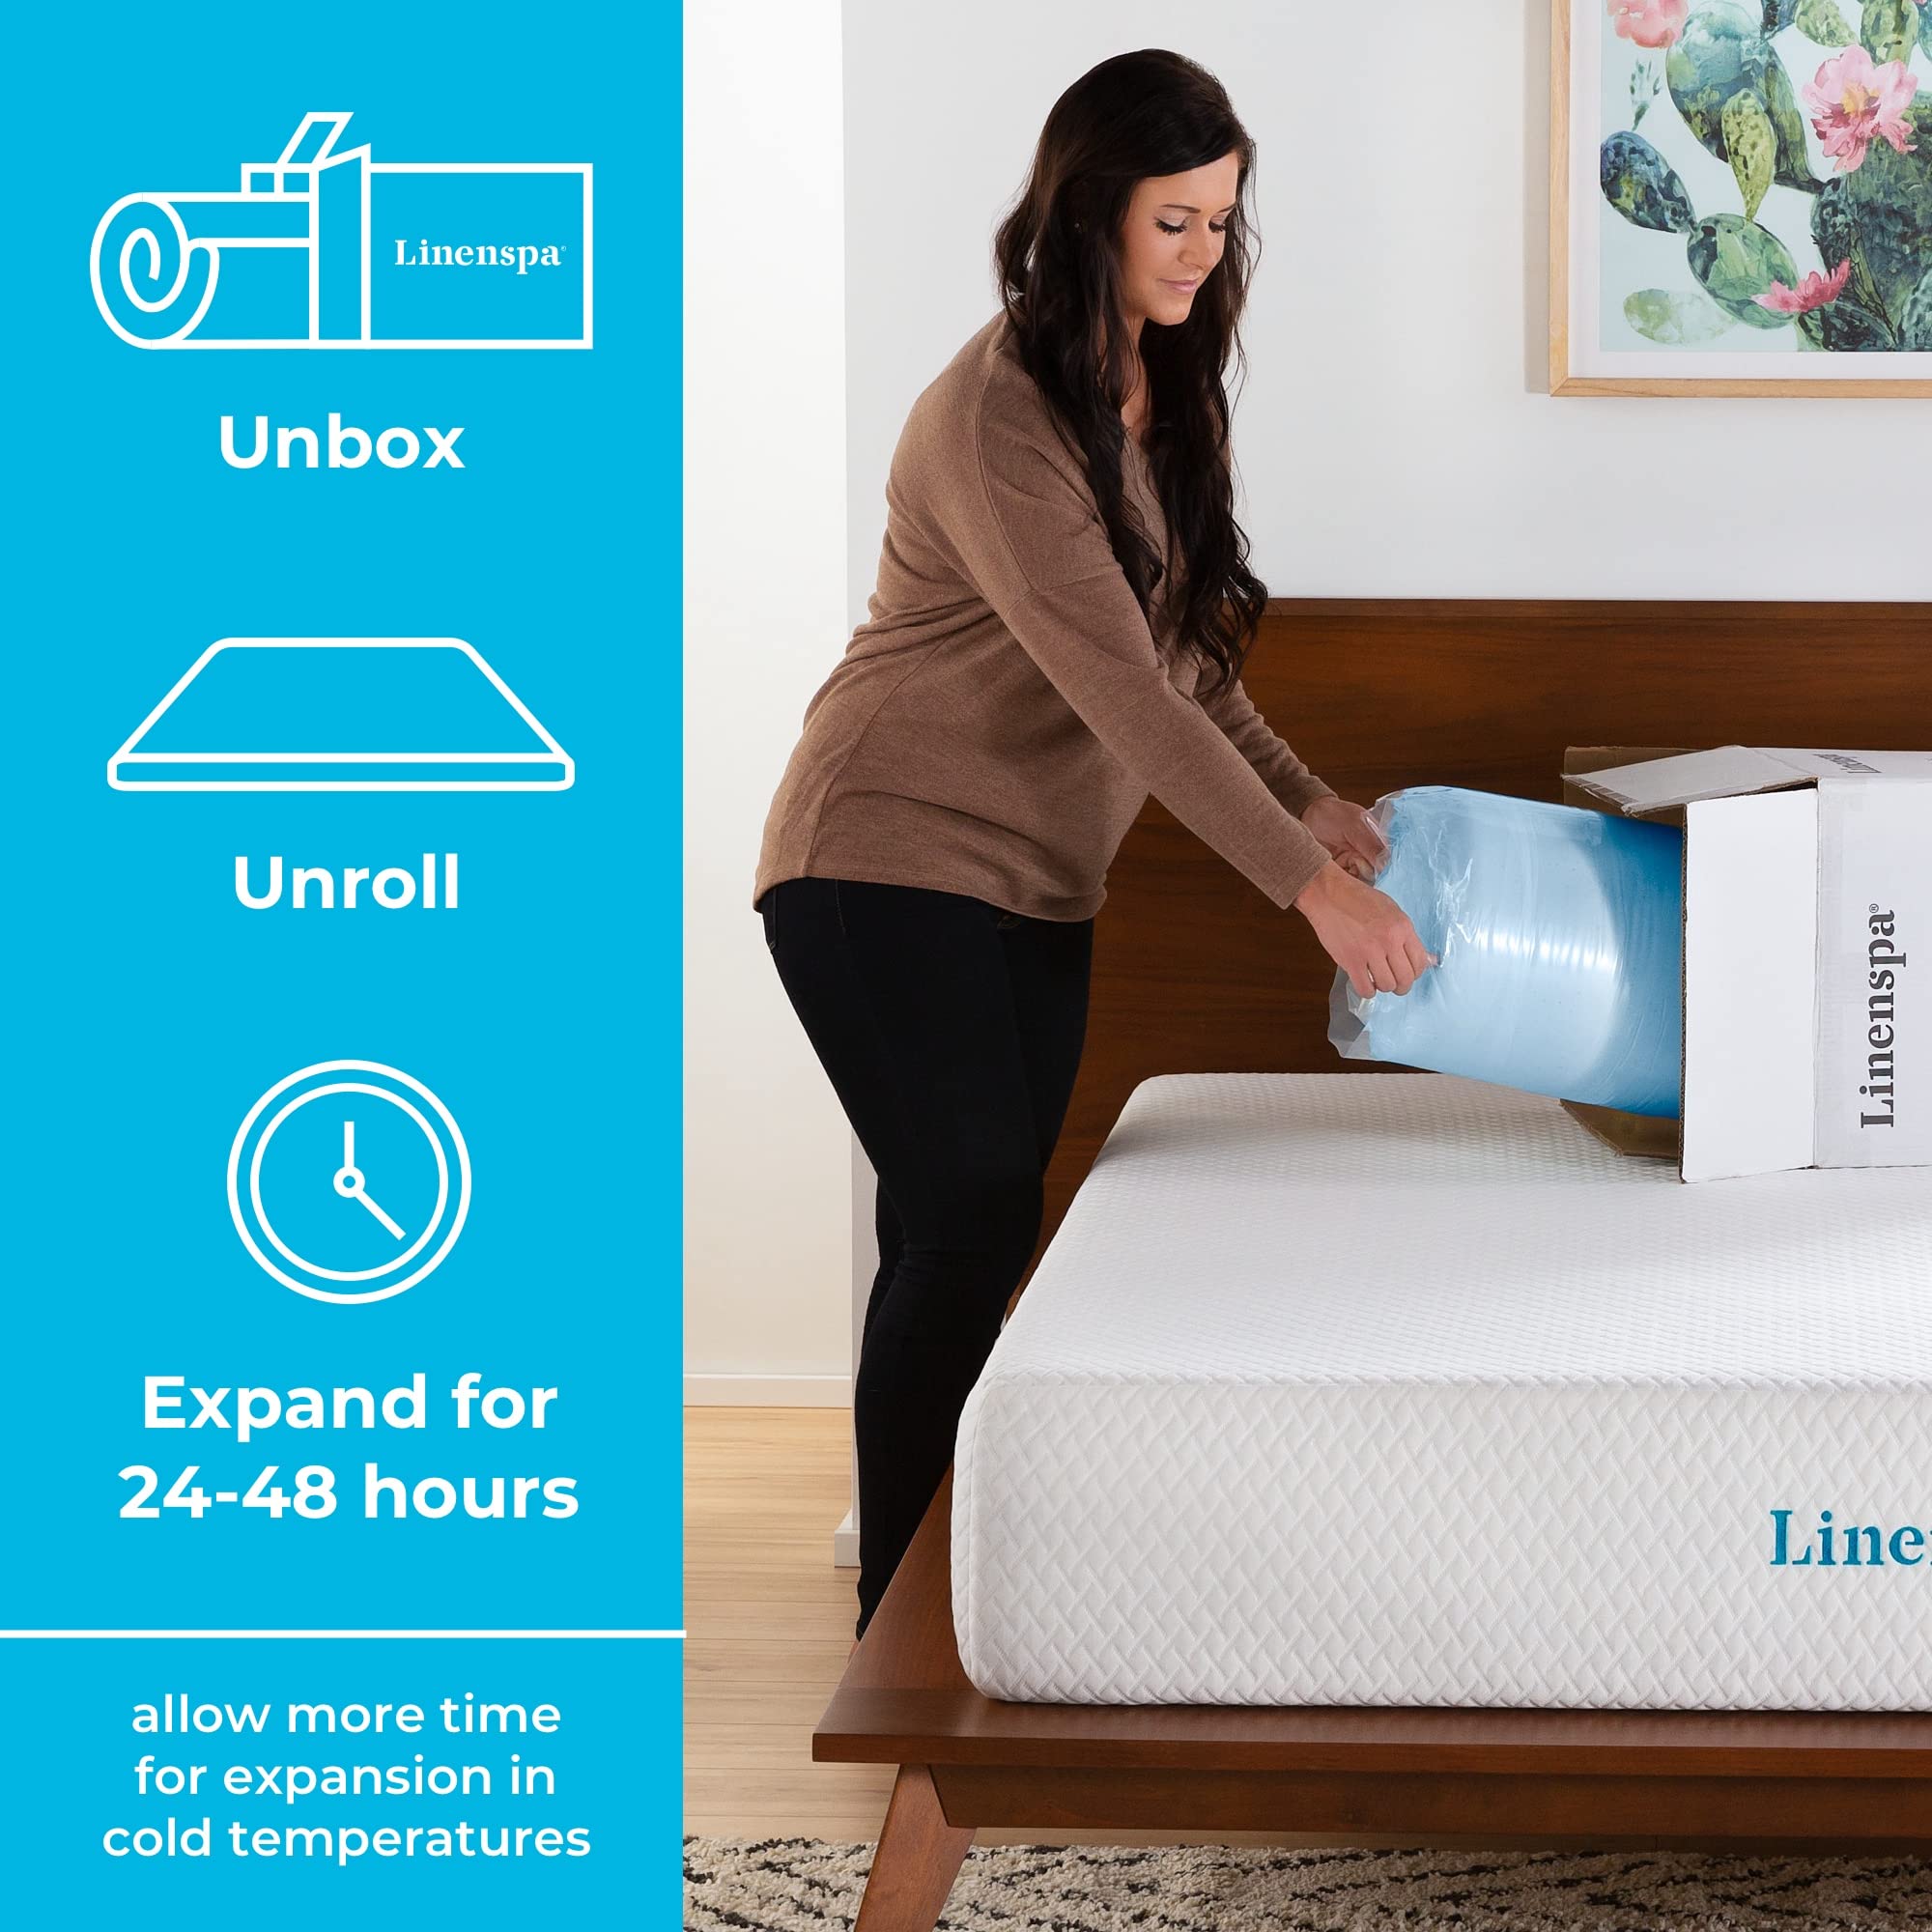 LINENSPA Memory Foam Mattress Topper - Gel-Infused Memory Foam - 3 Inch Style - Full Size - Plush Feel - Cooling Design - Pressure Relieving - Dorm Room Essentials - CertiPUR Certified